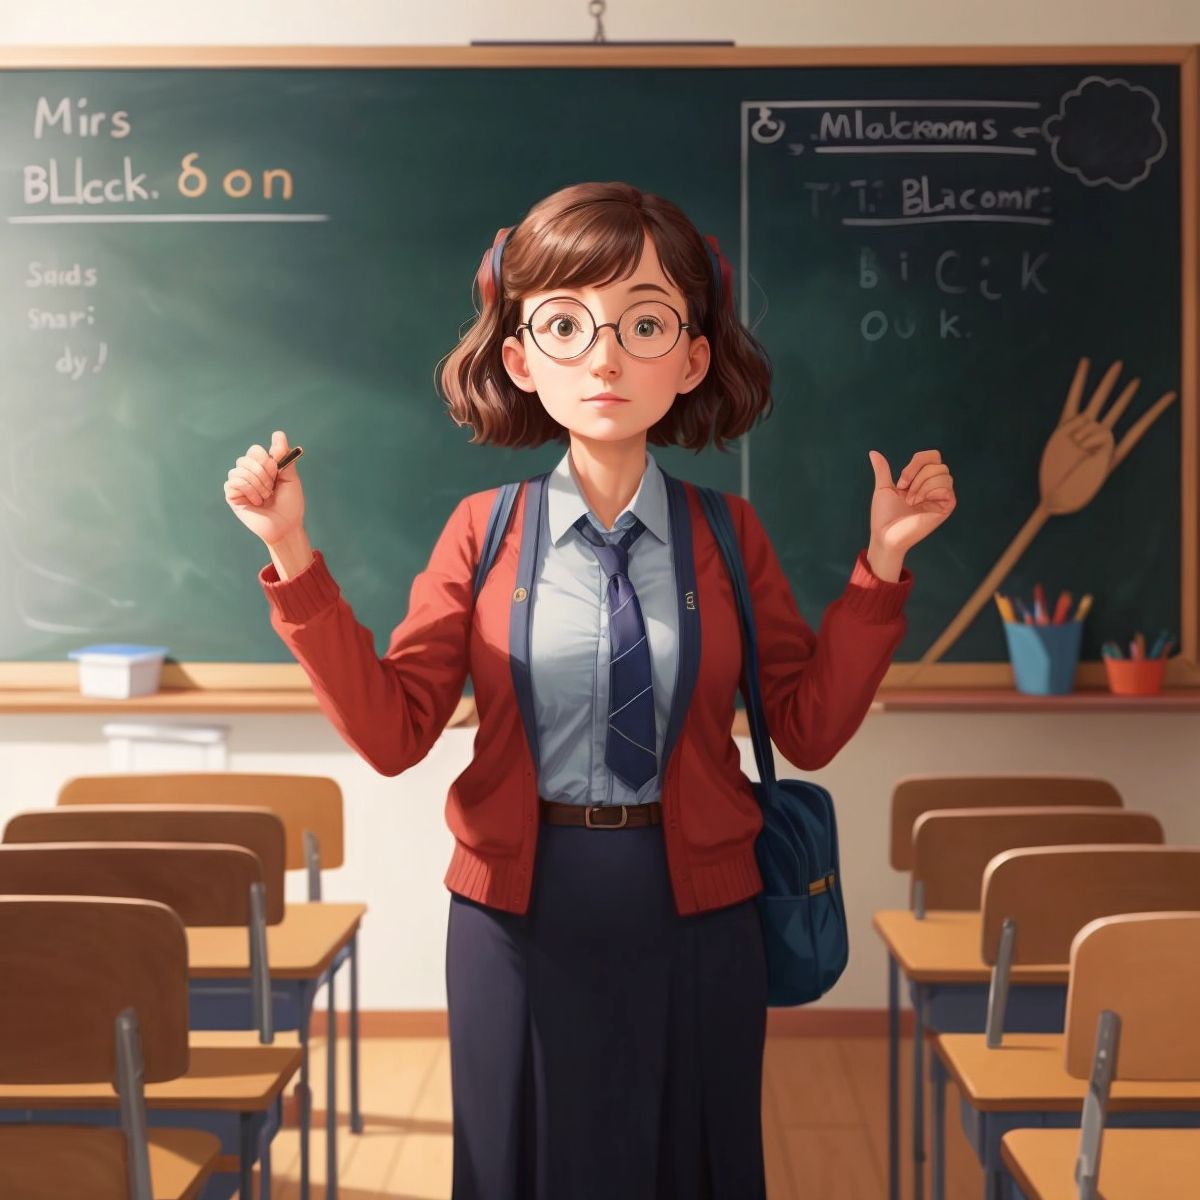 Mrs. Robin, the teacher, standing in front of the classroom with a blackboard behind her, filled with the day's lessons.